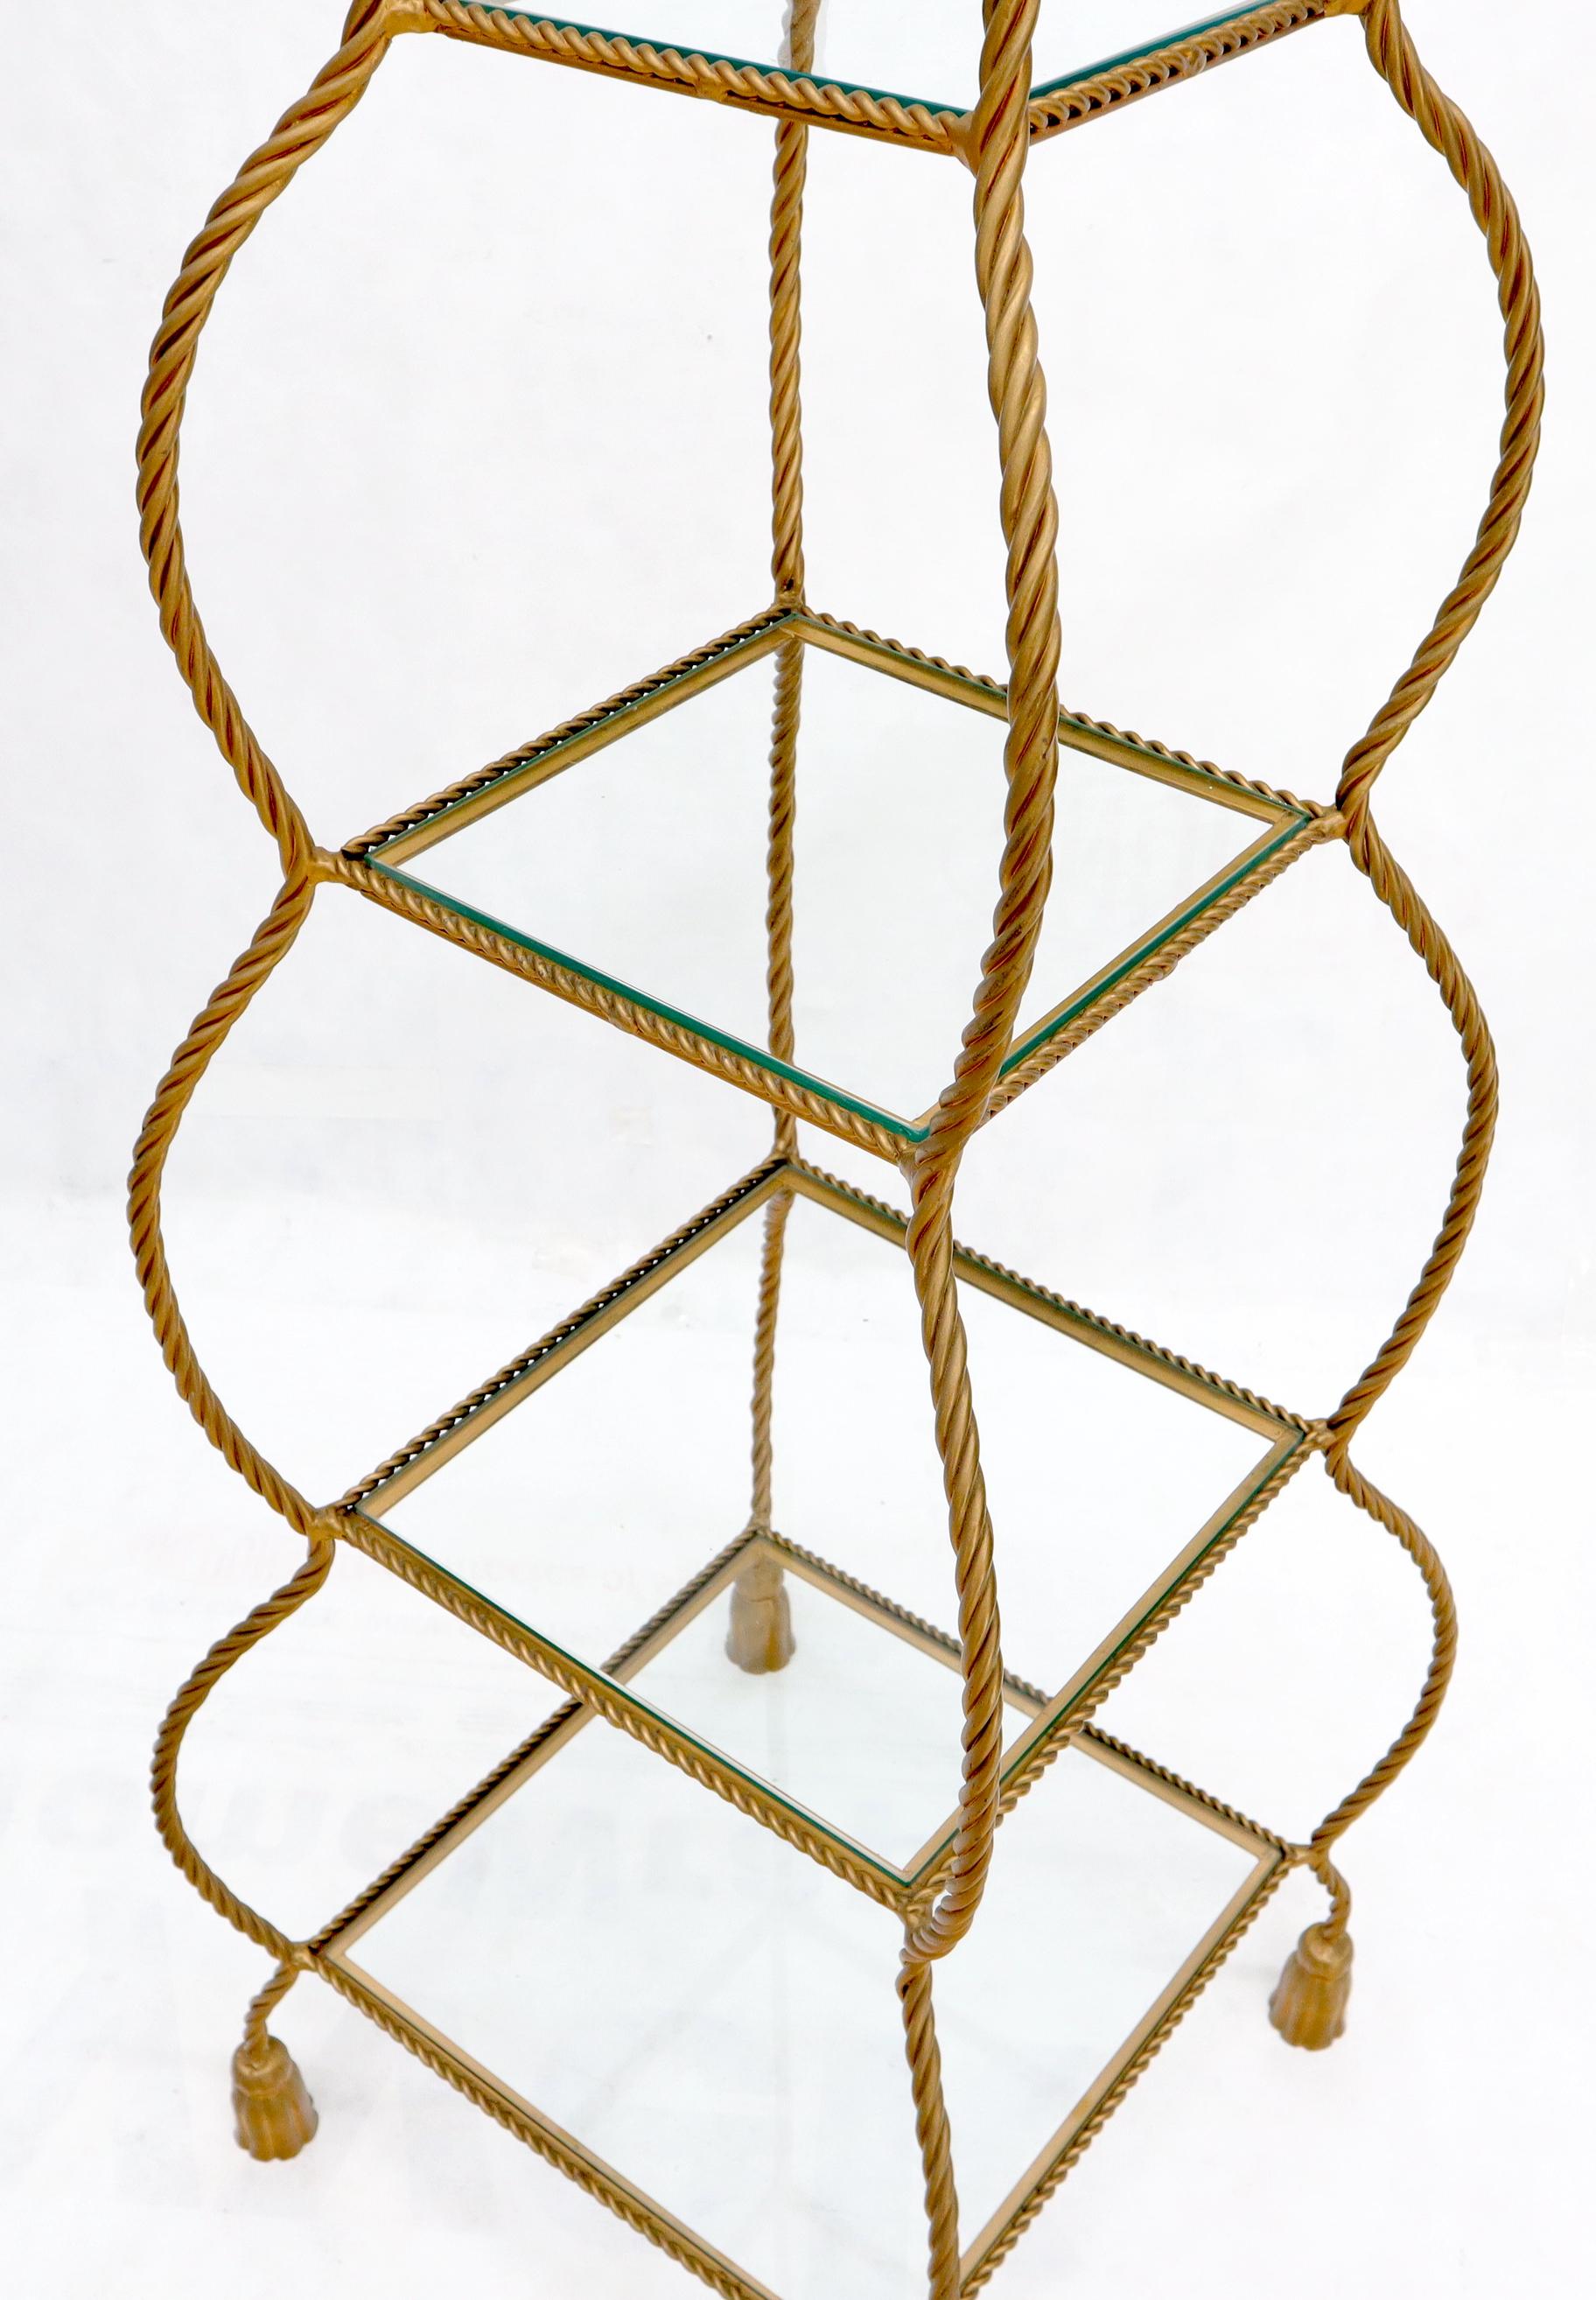 Unknown Four Tier Glass Shelves Twisted Metal Rope Square Étagère Shelf Display Unit For Sale